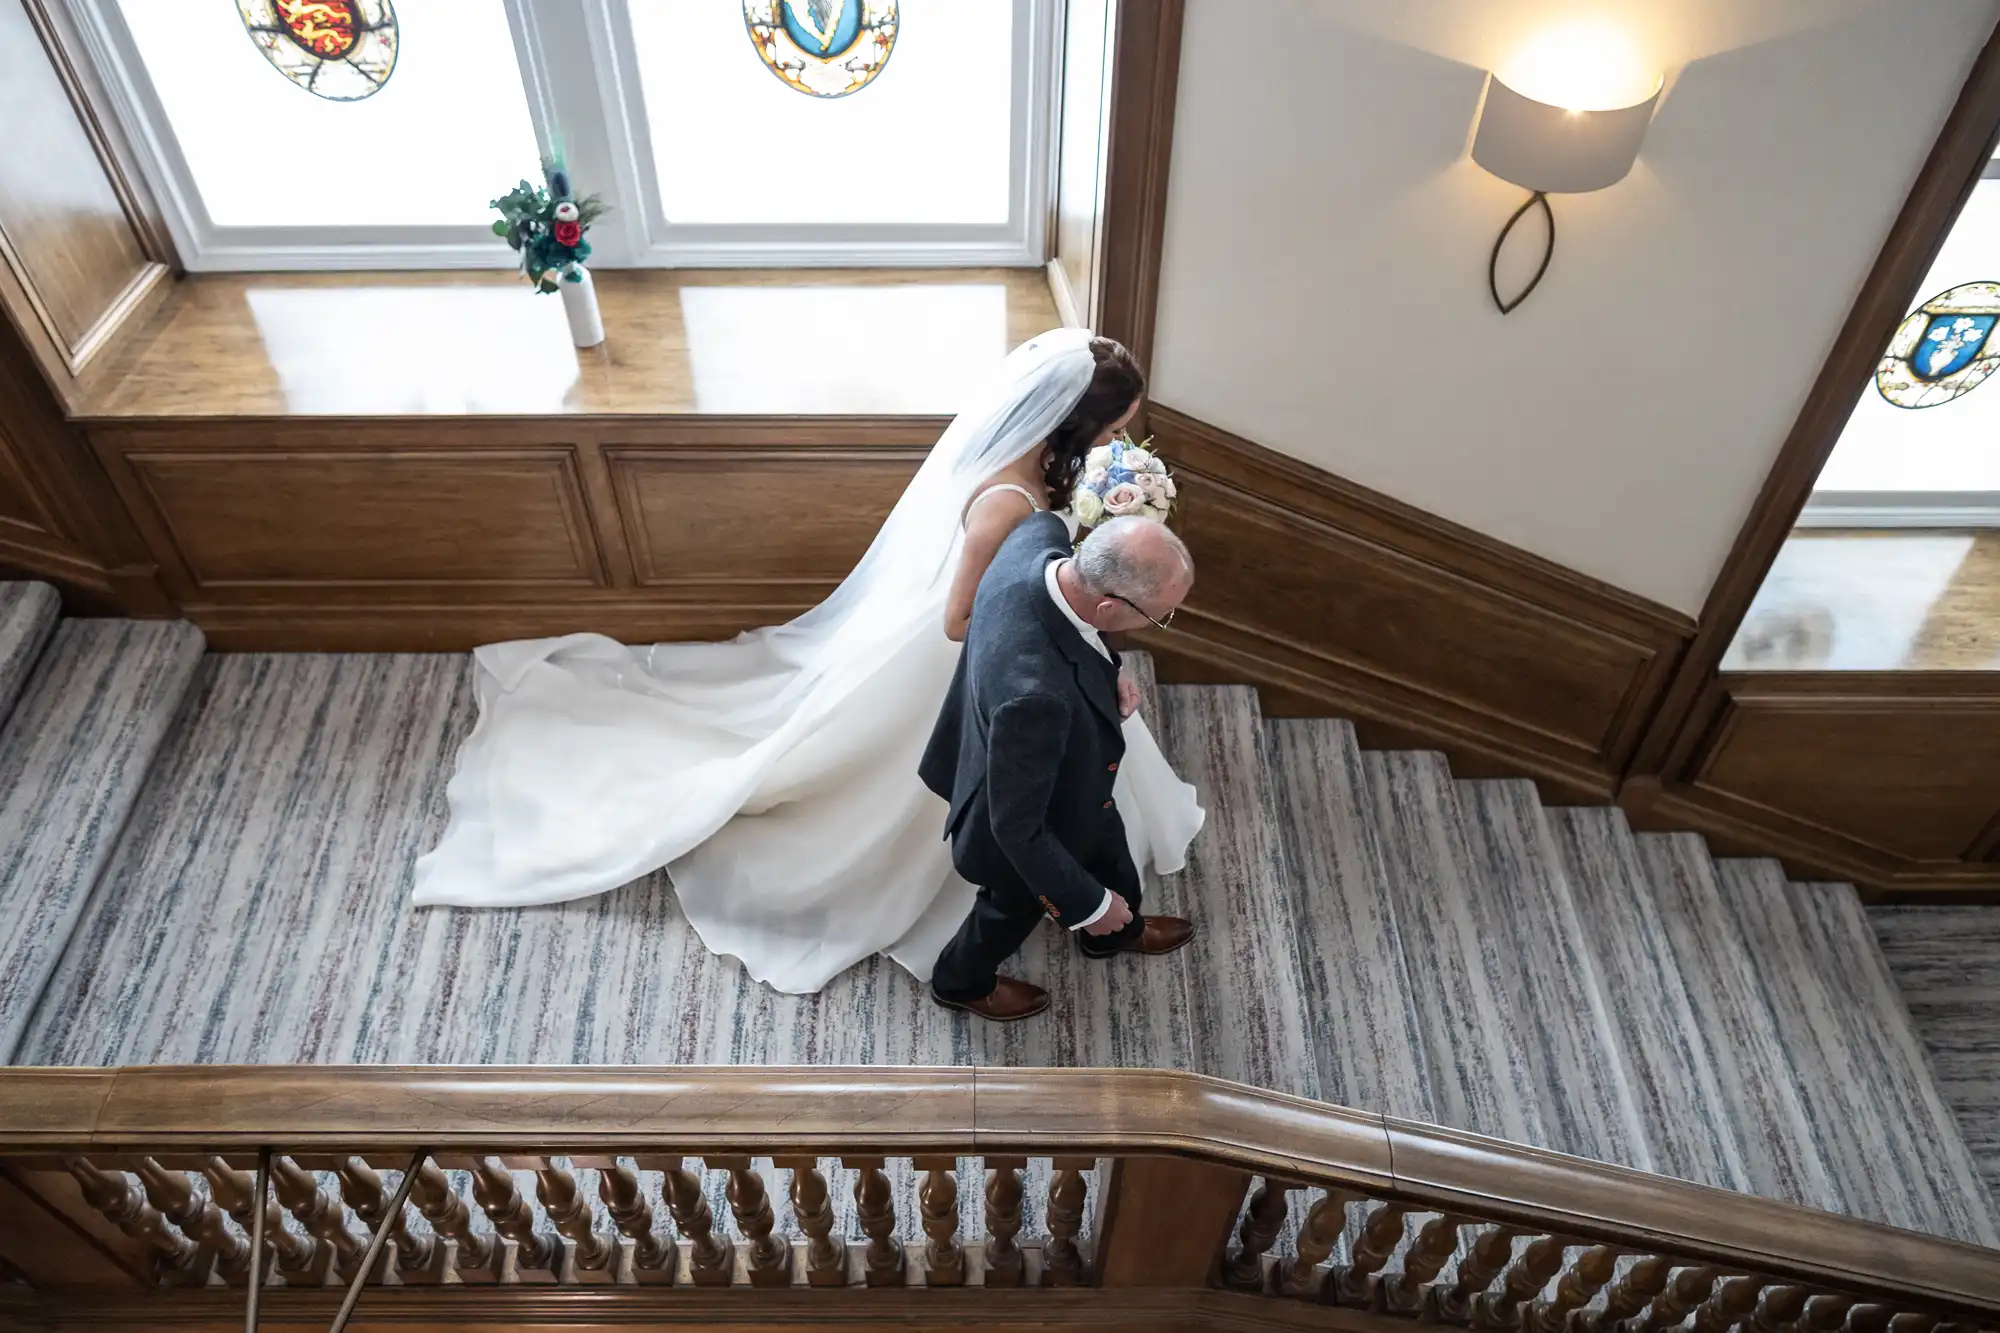 A bride with a flowing white dress walks arm in arm with an elderly man down a wooden staircase in an elegant building, viewed from above.